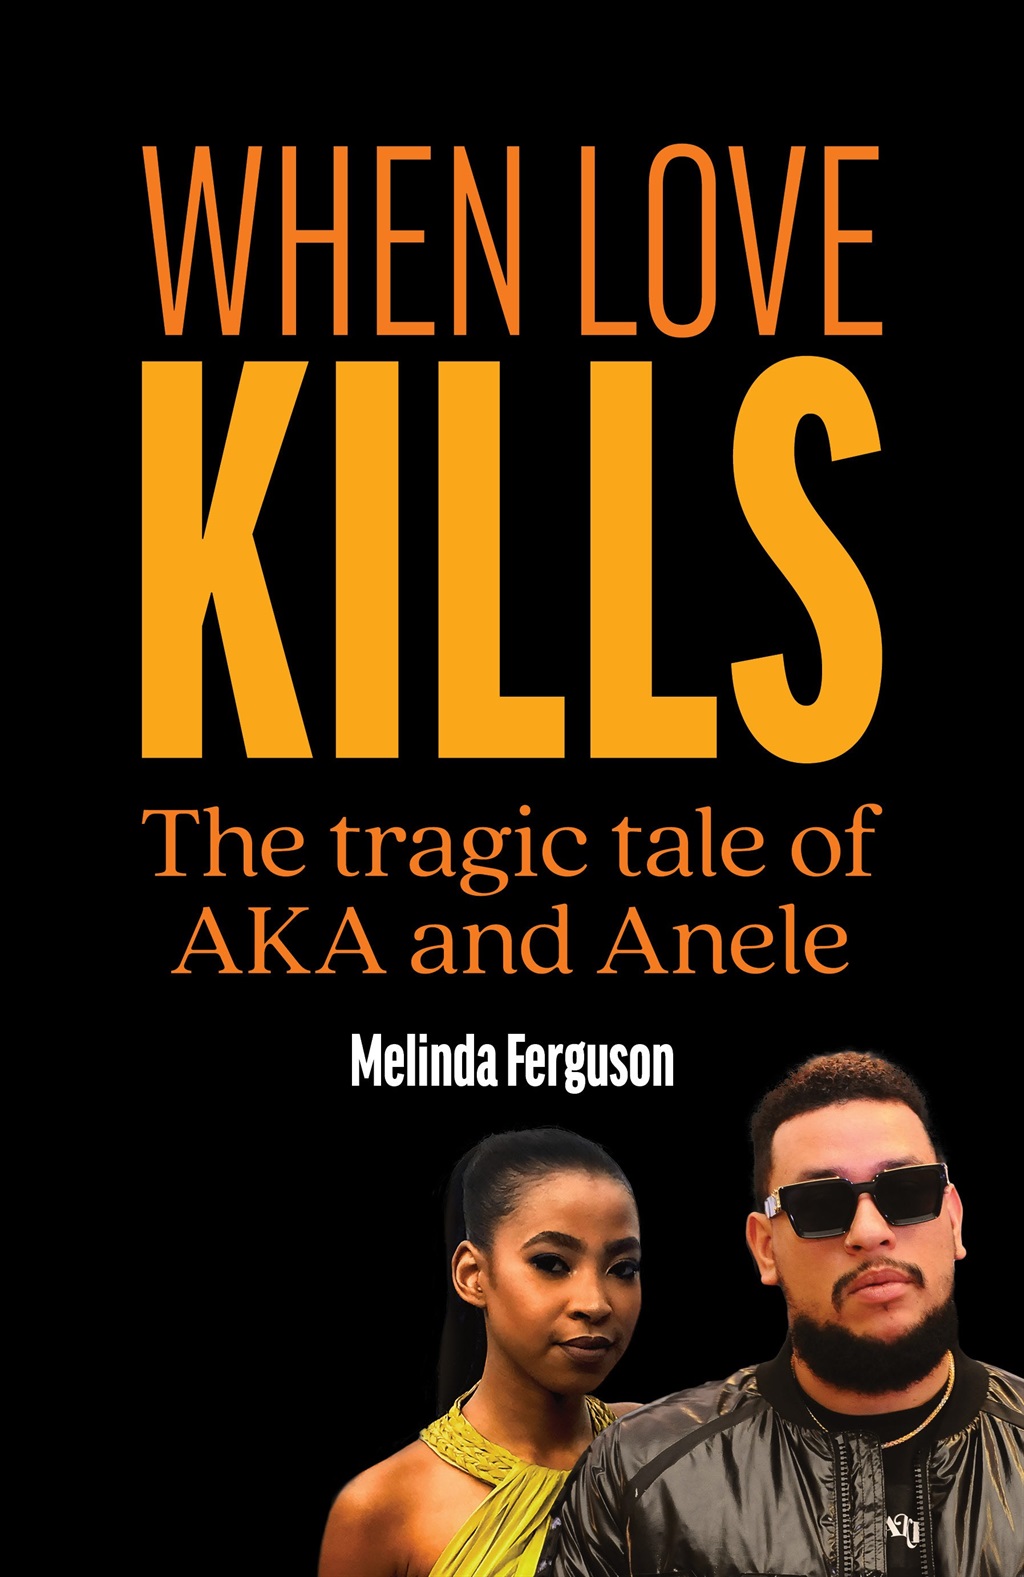 Melinda wrote the book 'When Love Kills' with comp